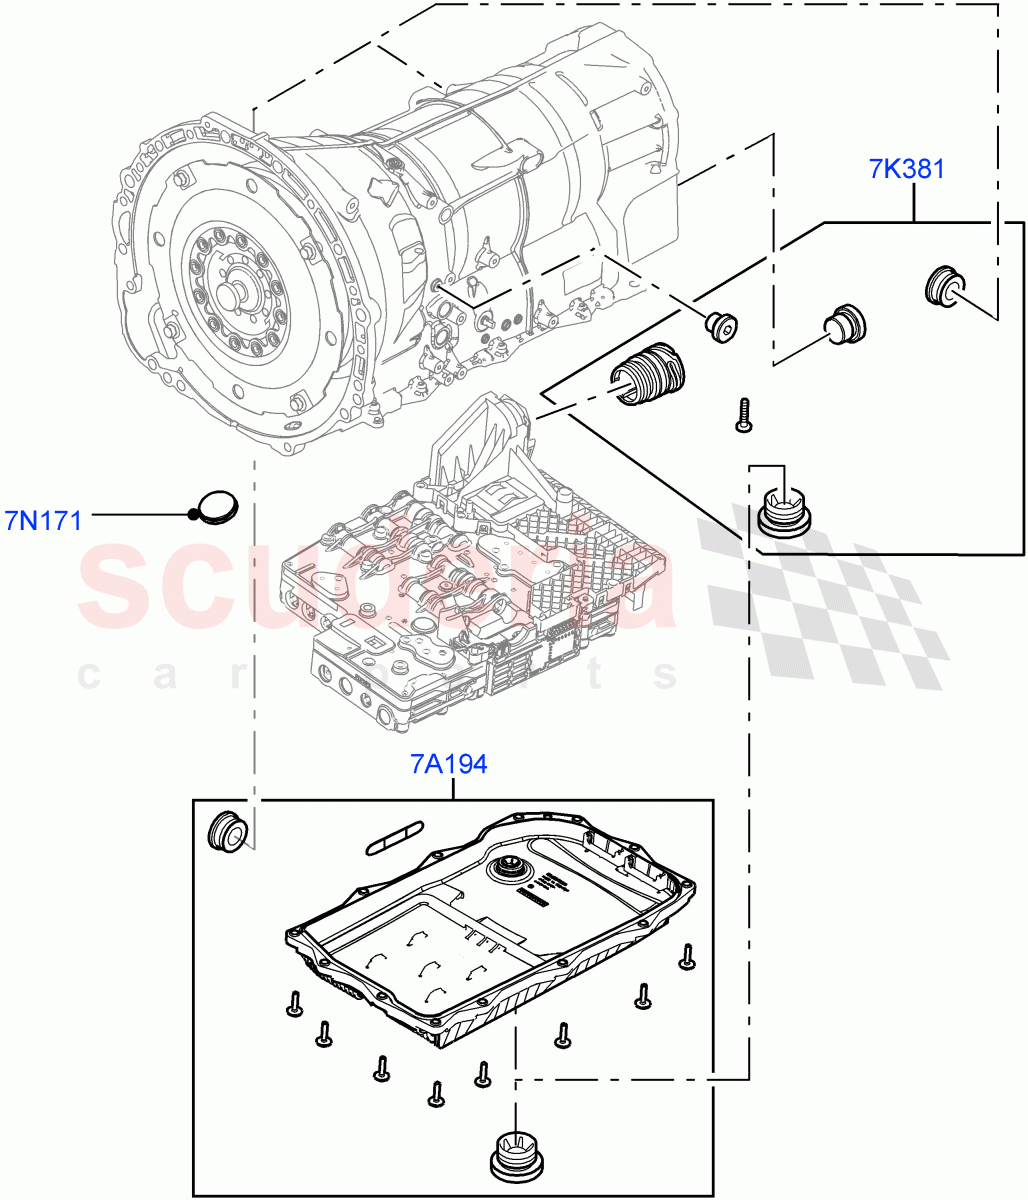 Transmission External Components(Nitra Plant Build)(2.0L I4 DSL HIGH DOHC AJ200,8 Speed Auto Trans ZF 8HP70 4WD,5.0 Petrol AJ133 DOHC CDA)((V)FROMK2000001) of Land Rover Land Rover Discovery 5 (2017+) [3.0 I6 Turbo Diesel AJ20D6]